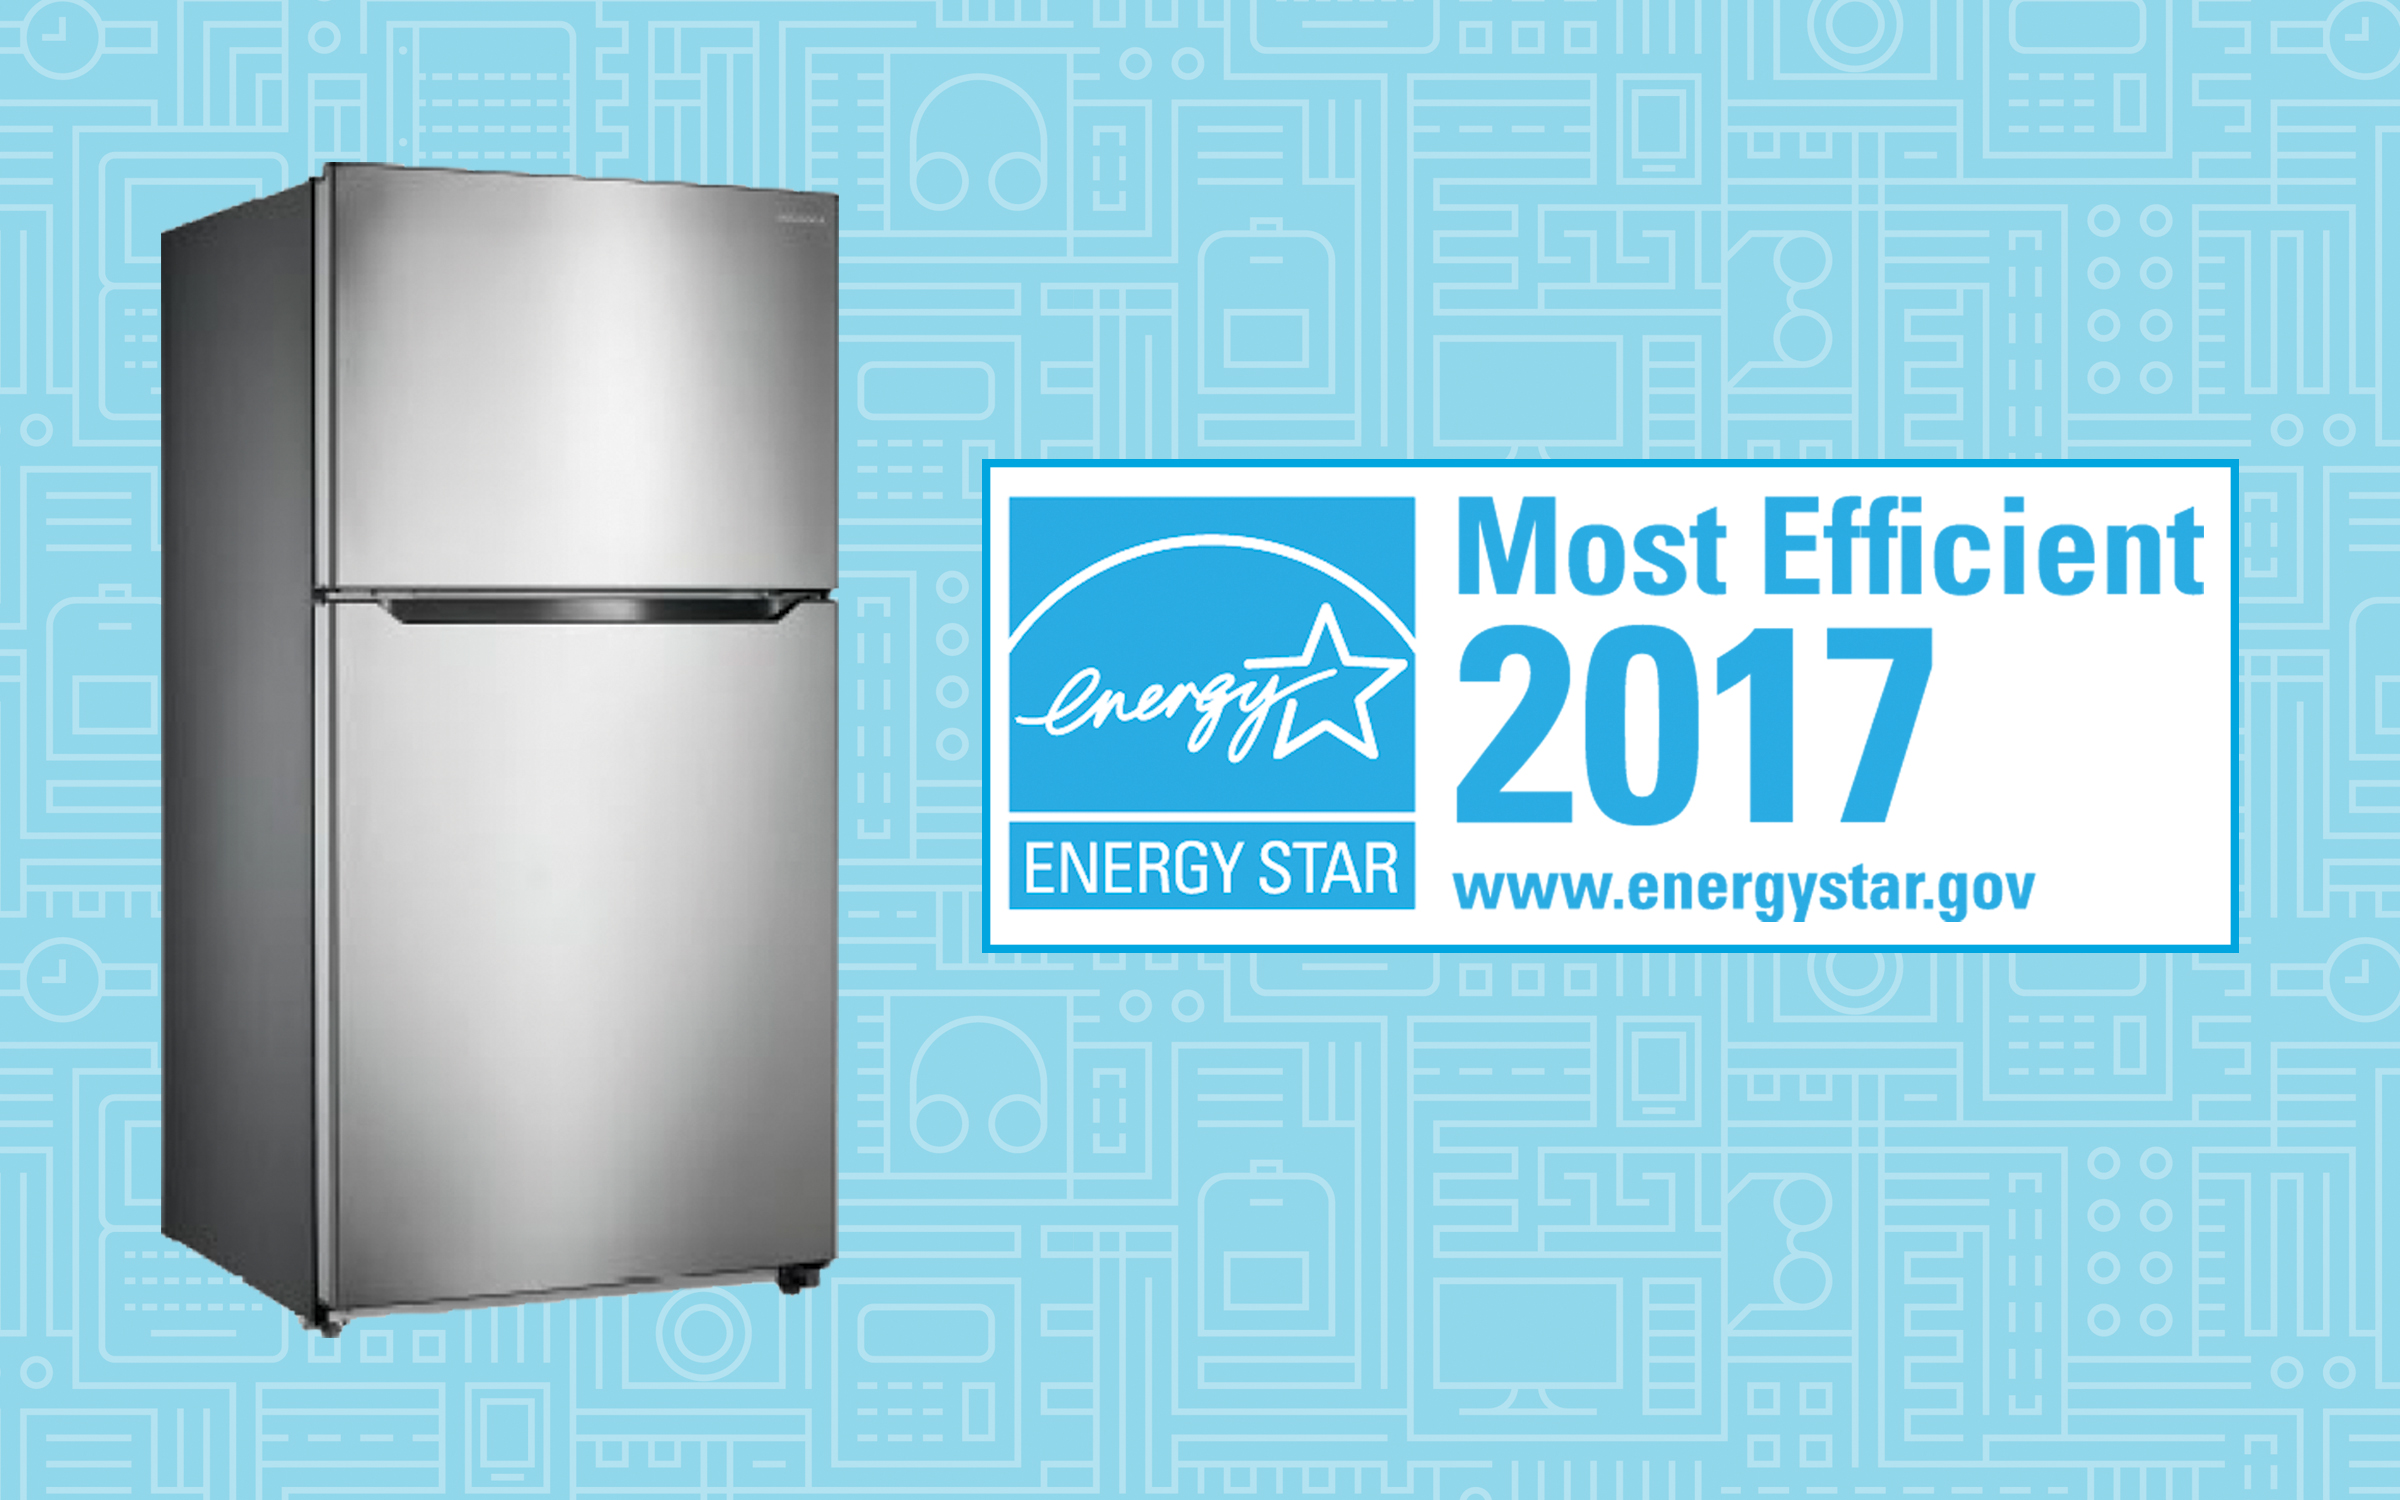 Insignia Fridges Named ENERGY STAR® Most Efficient Best Buy Corporate News and InformationBest